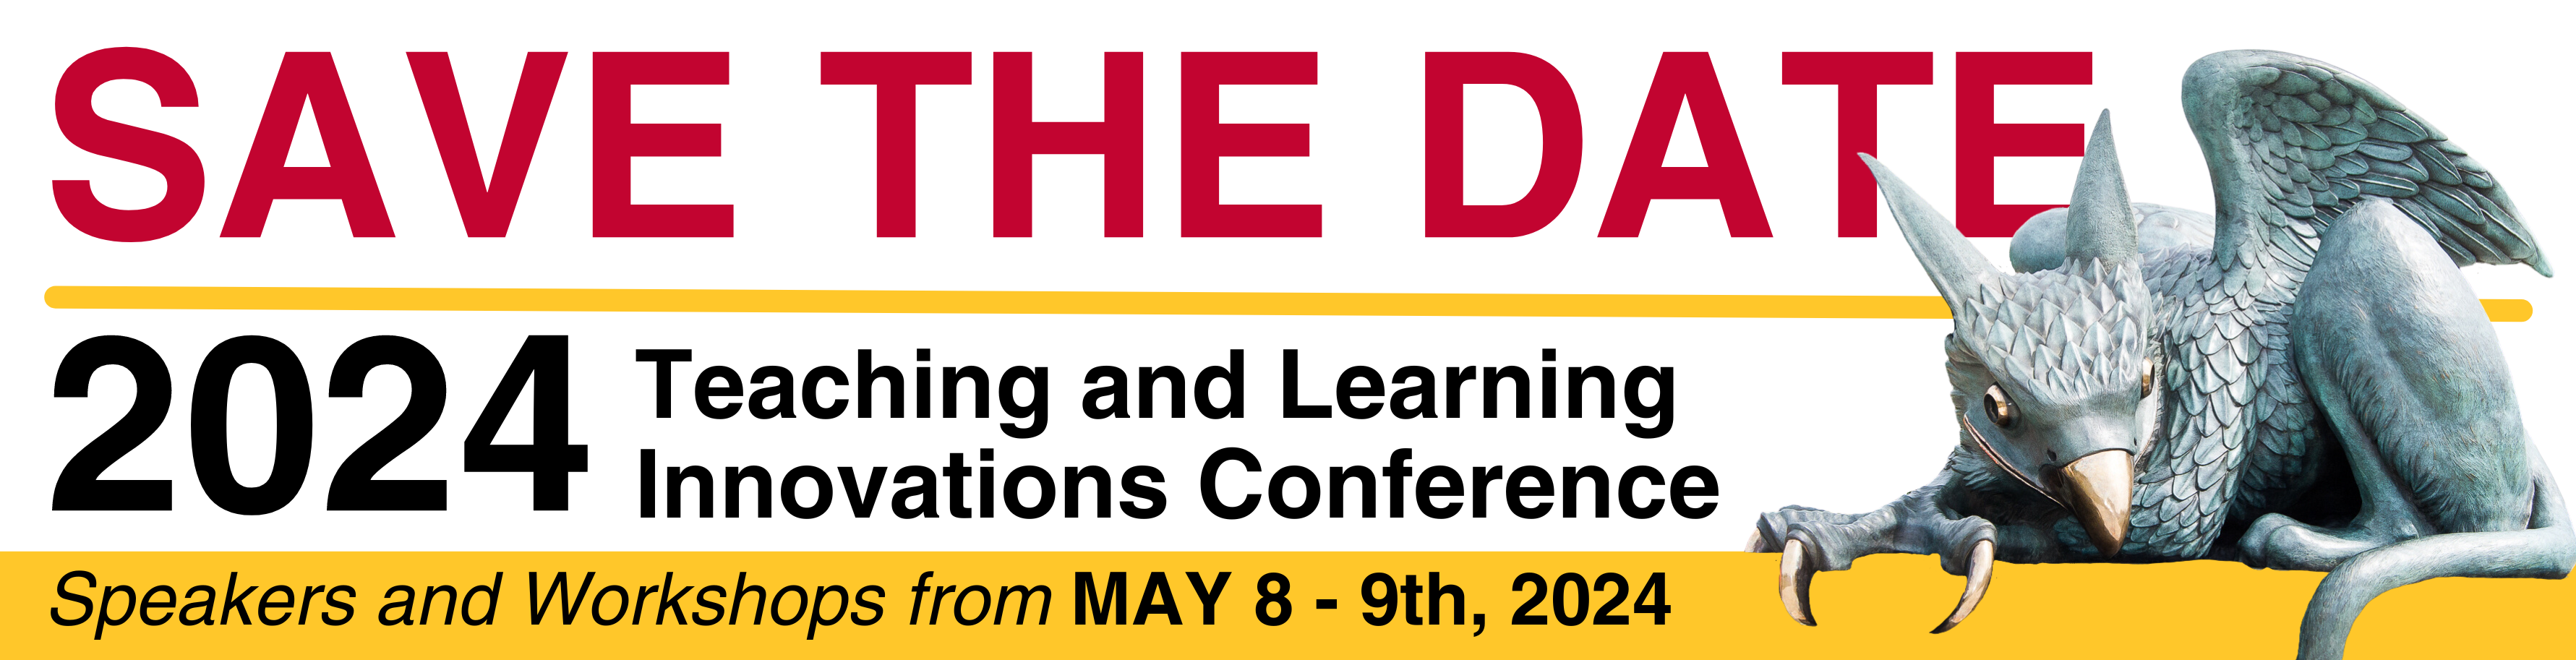 Save the Date for TLI 2024: May 8-9, 2024